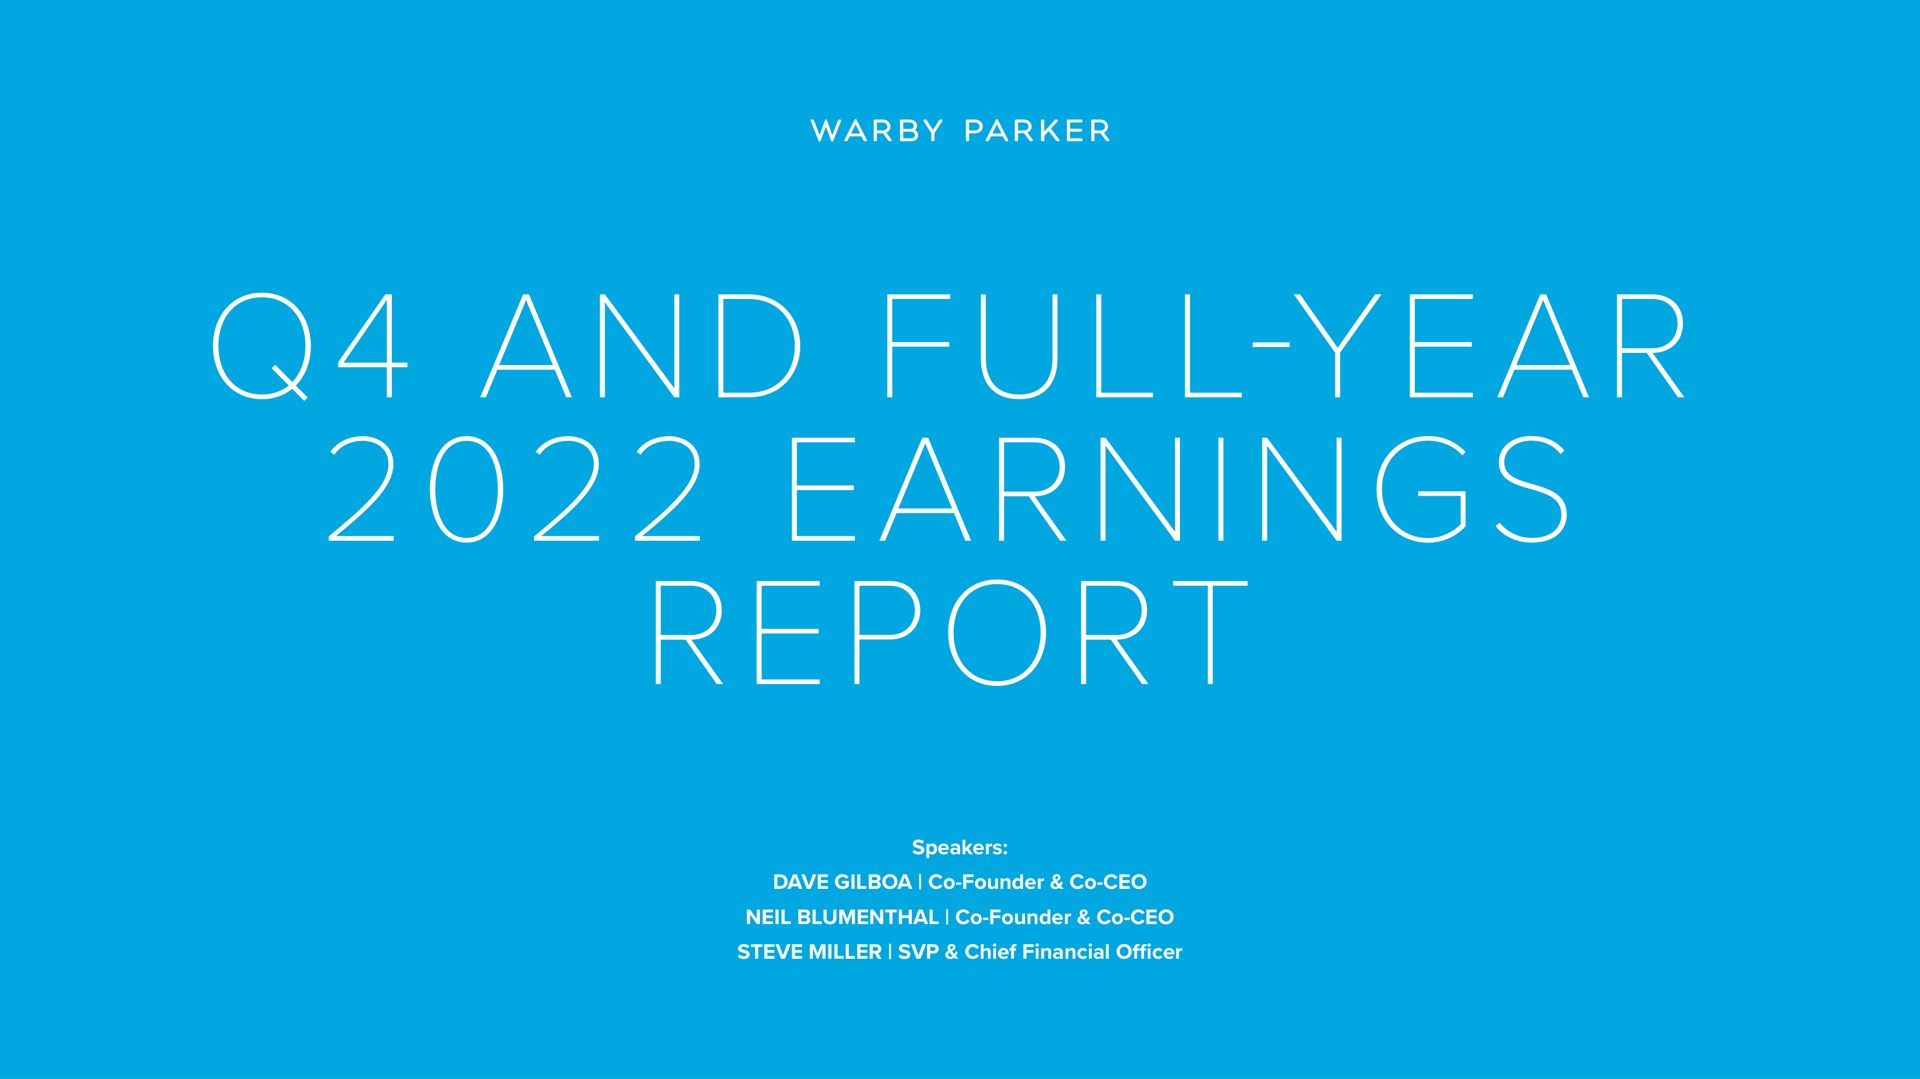 and full year earnings report parker i | Warby Parker